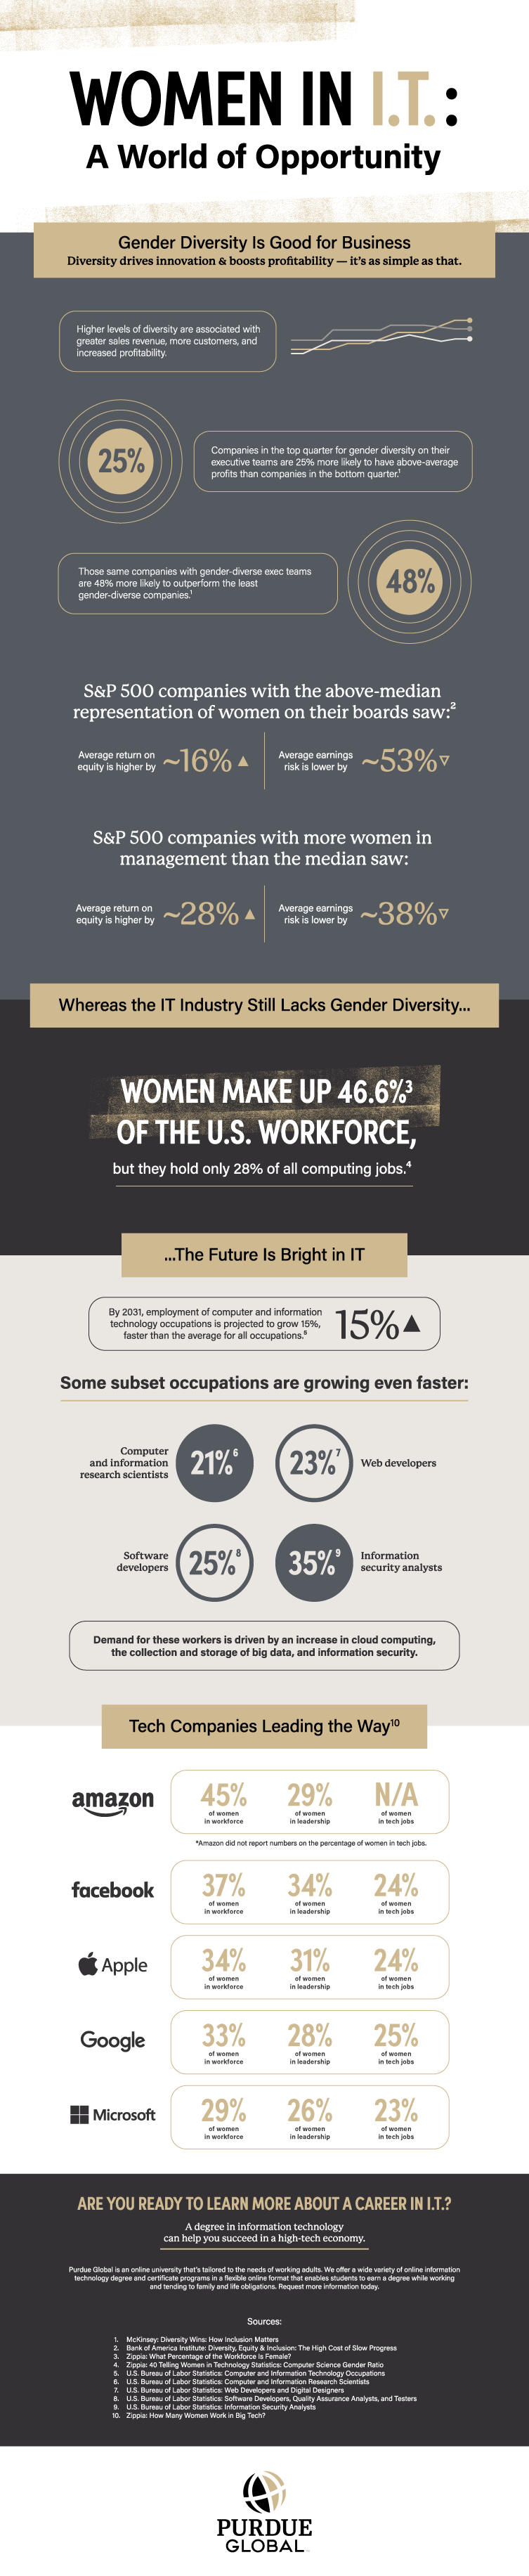 Women in IT: A World of Opportunity [Infographic]. Infographic content is included below the image.